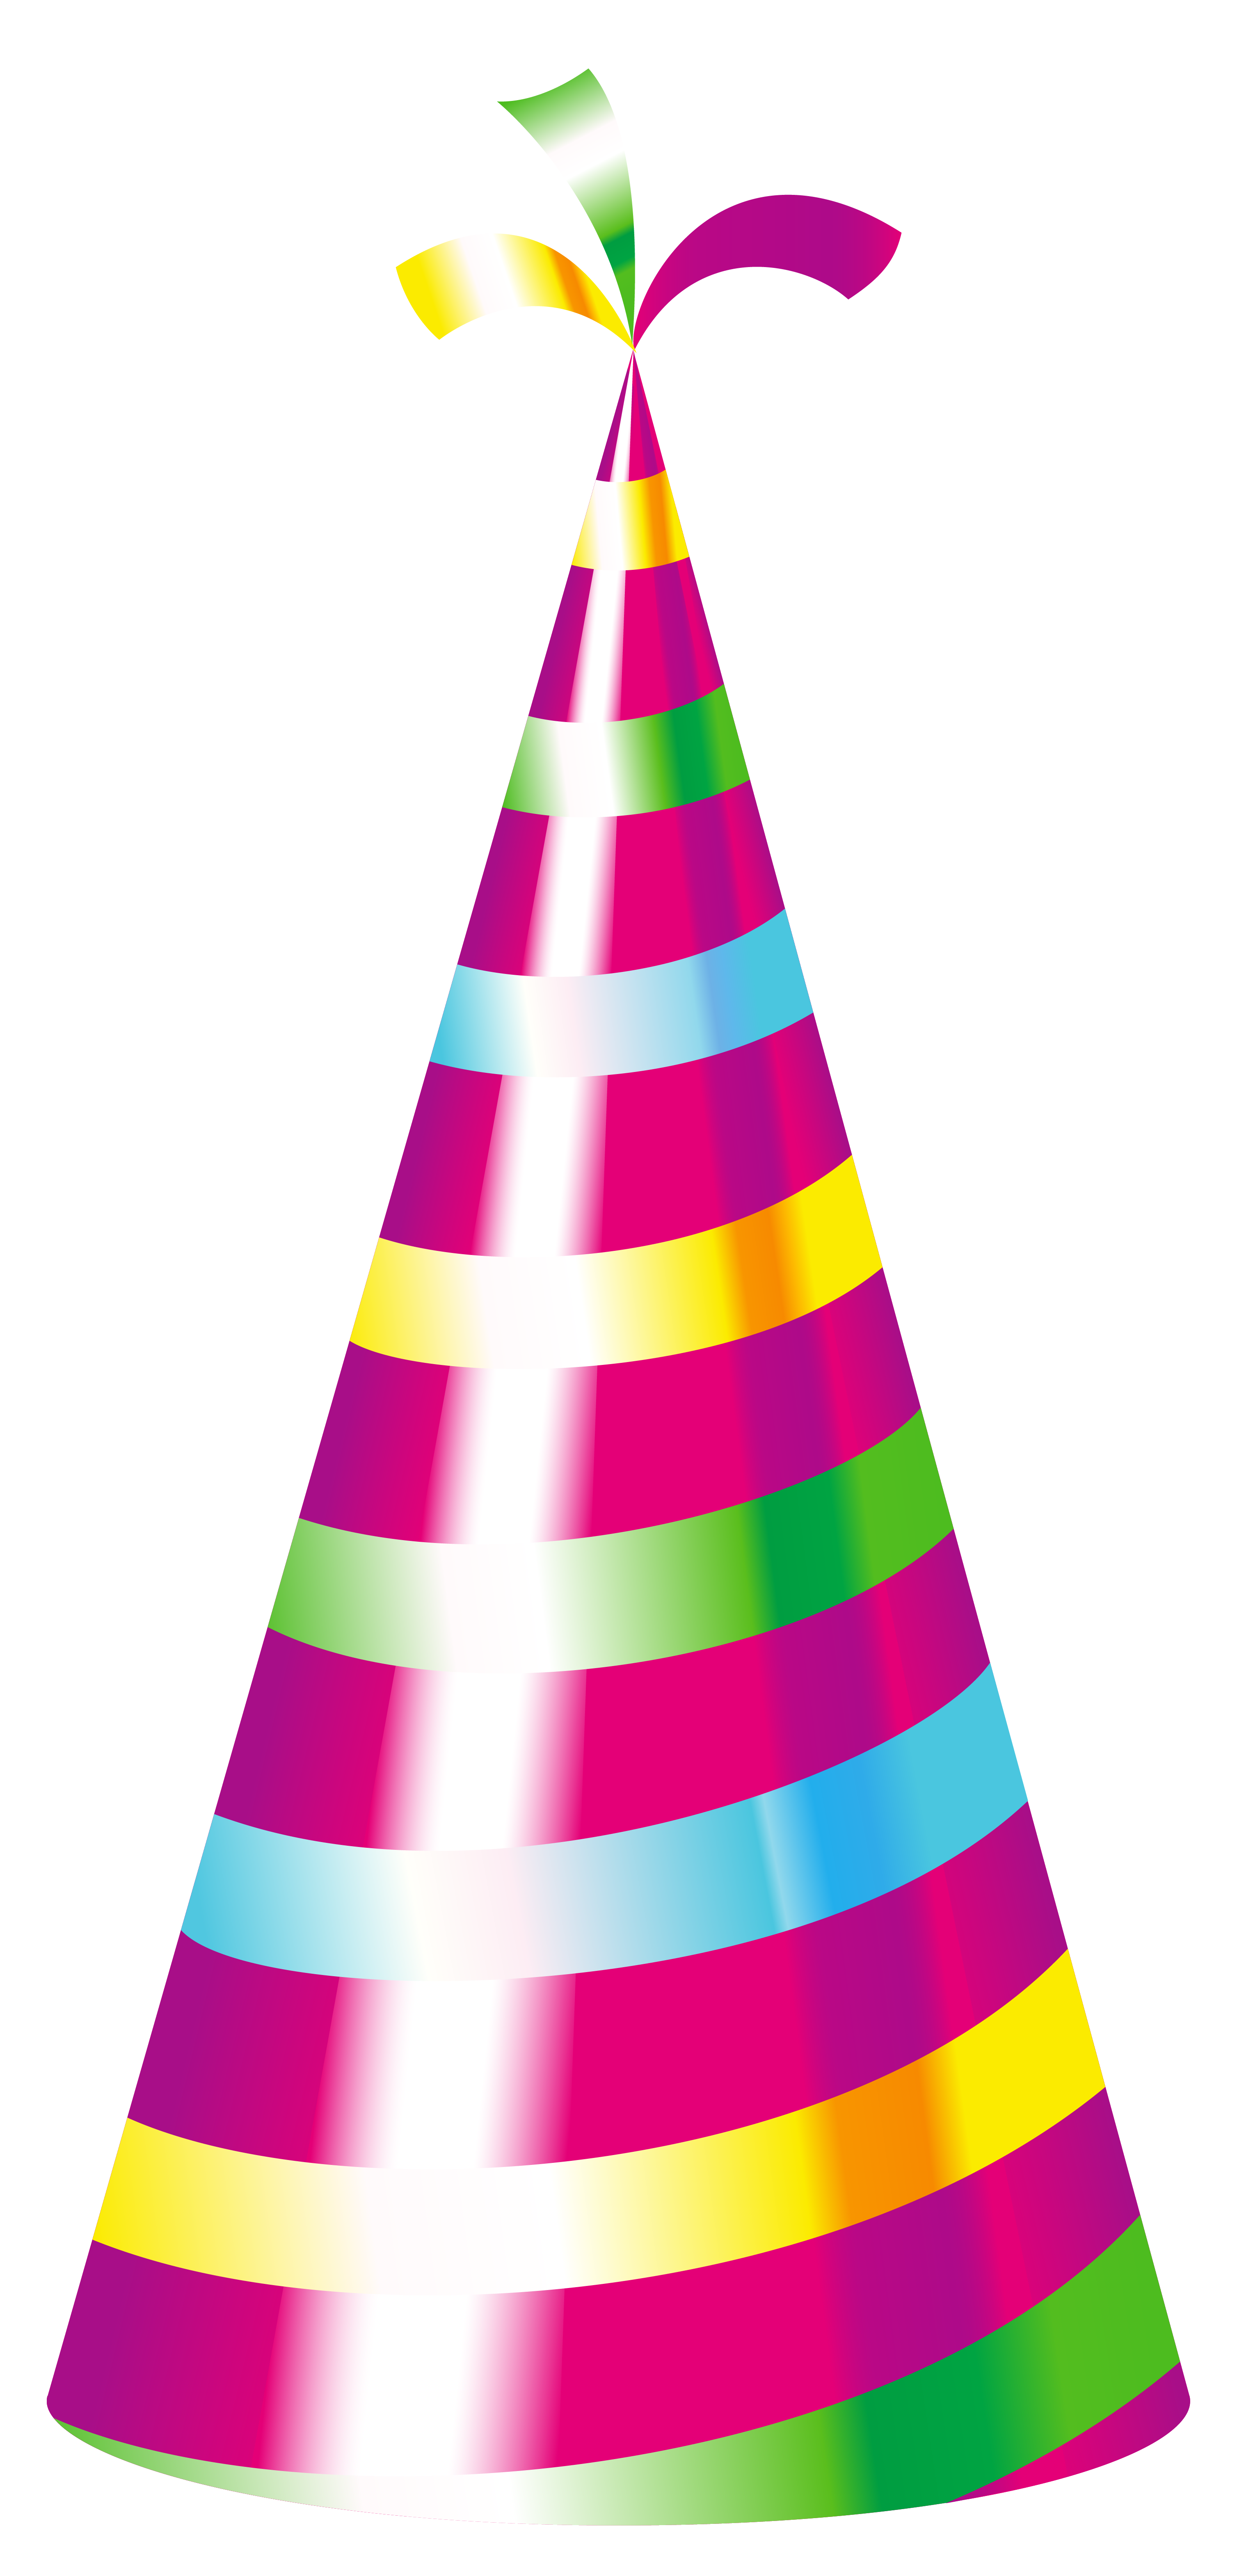 free clipart party hat - photo #39